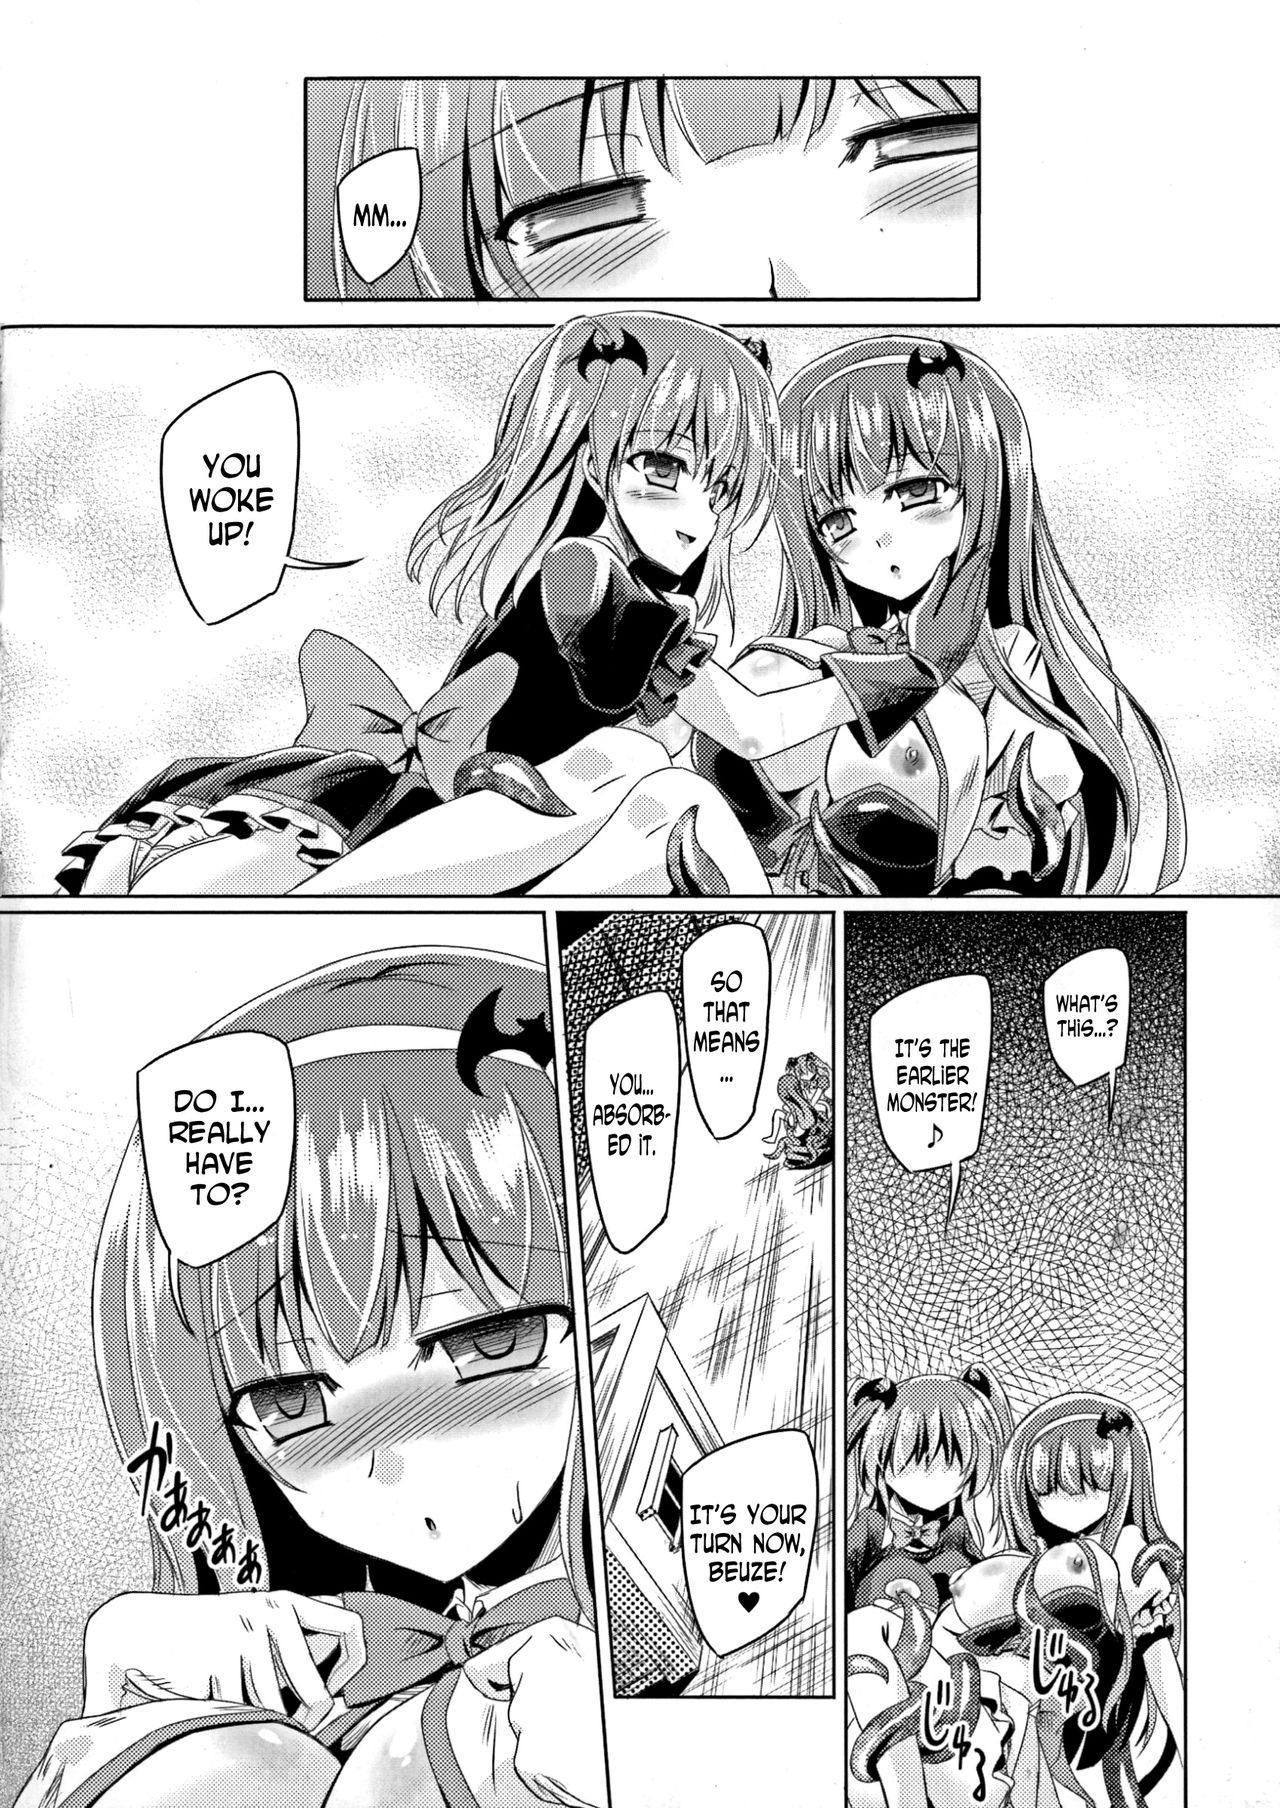 Creampies Kyuuma Tenshi Succubus Kiss | Monster Absorption Angel Succubus Kiss Sologirl - Page 8